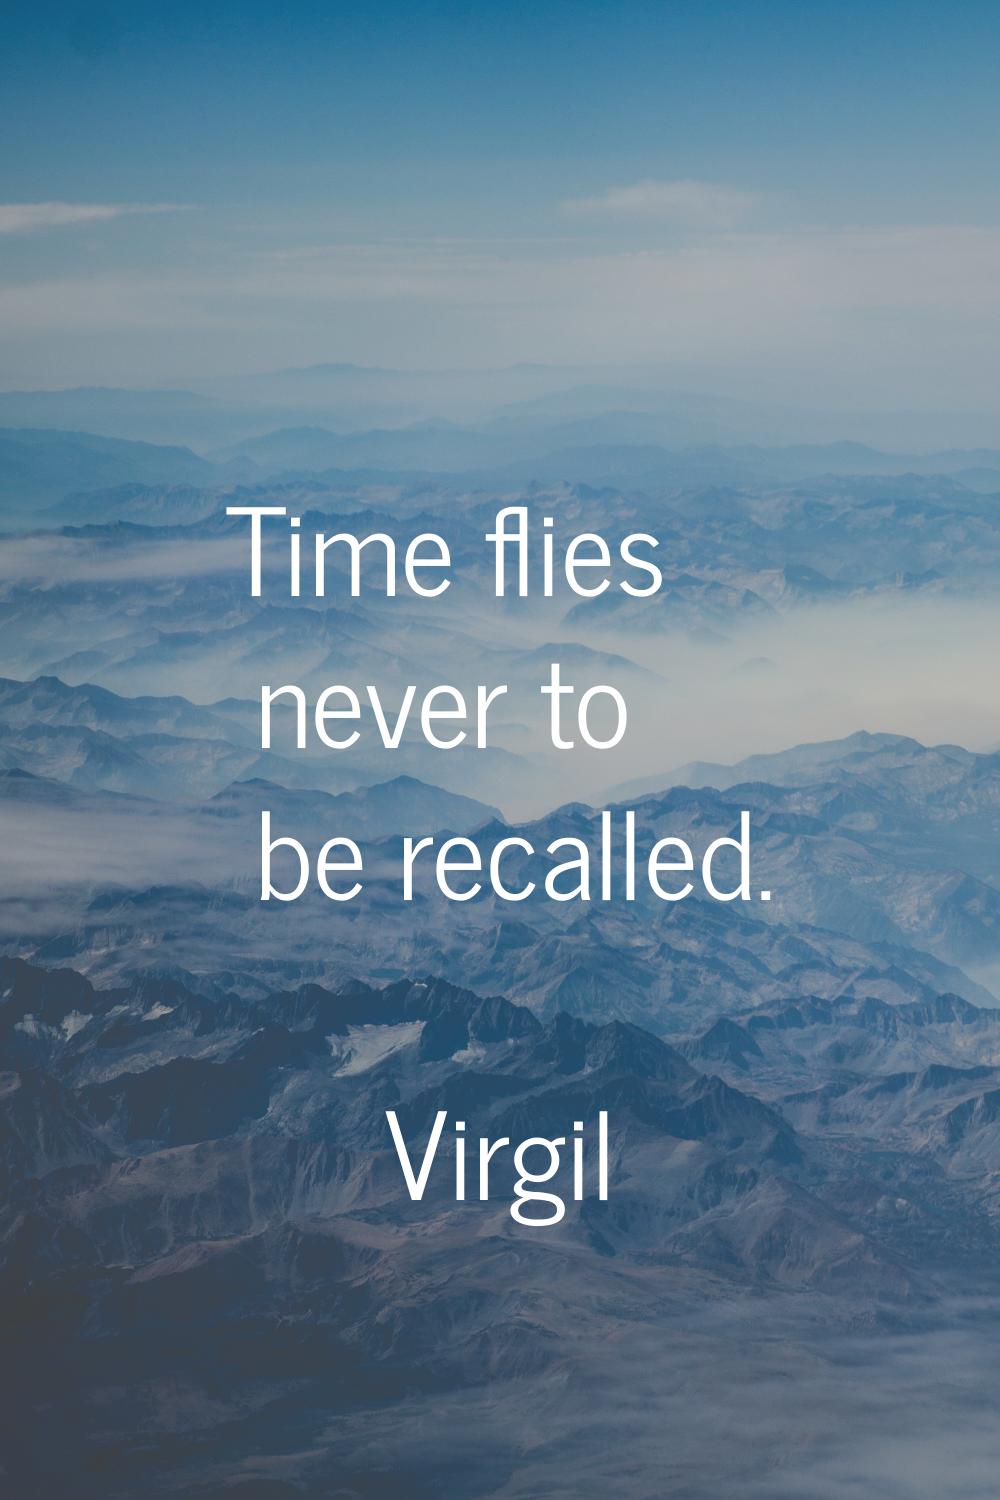 Time flies never to be recalled.